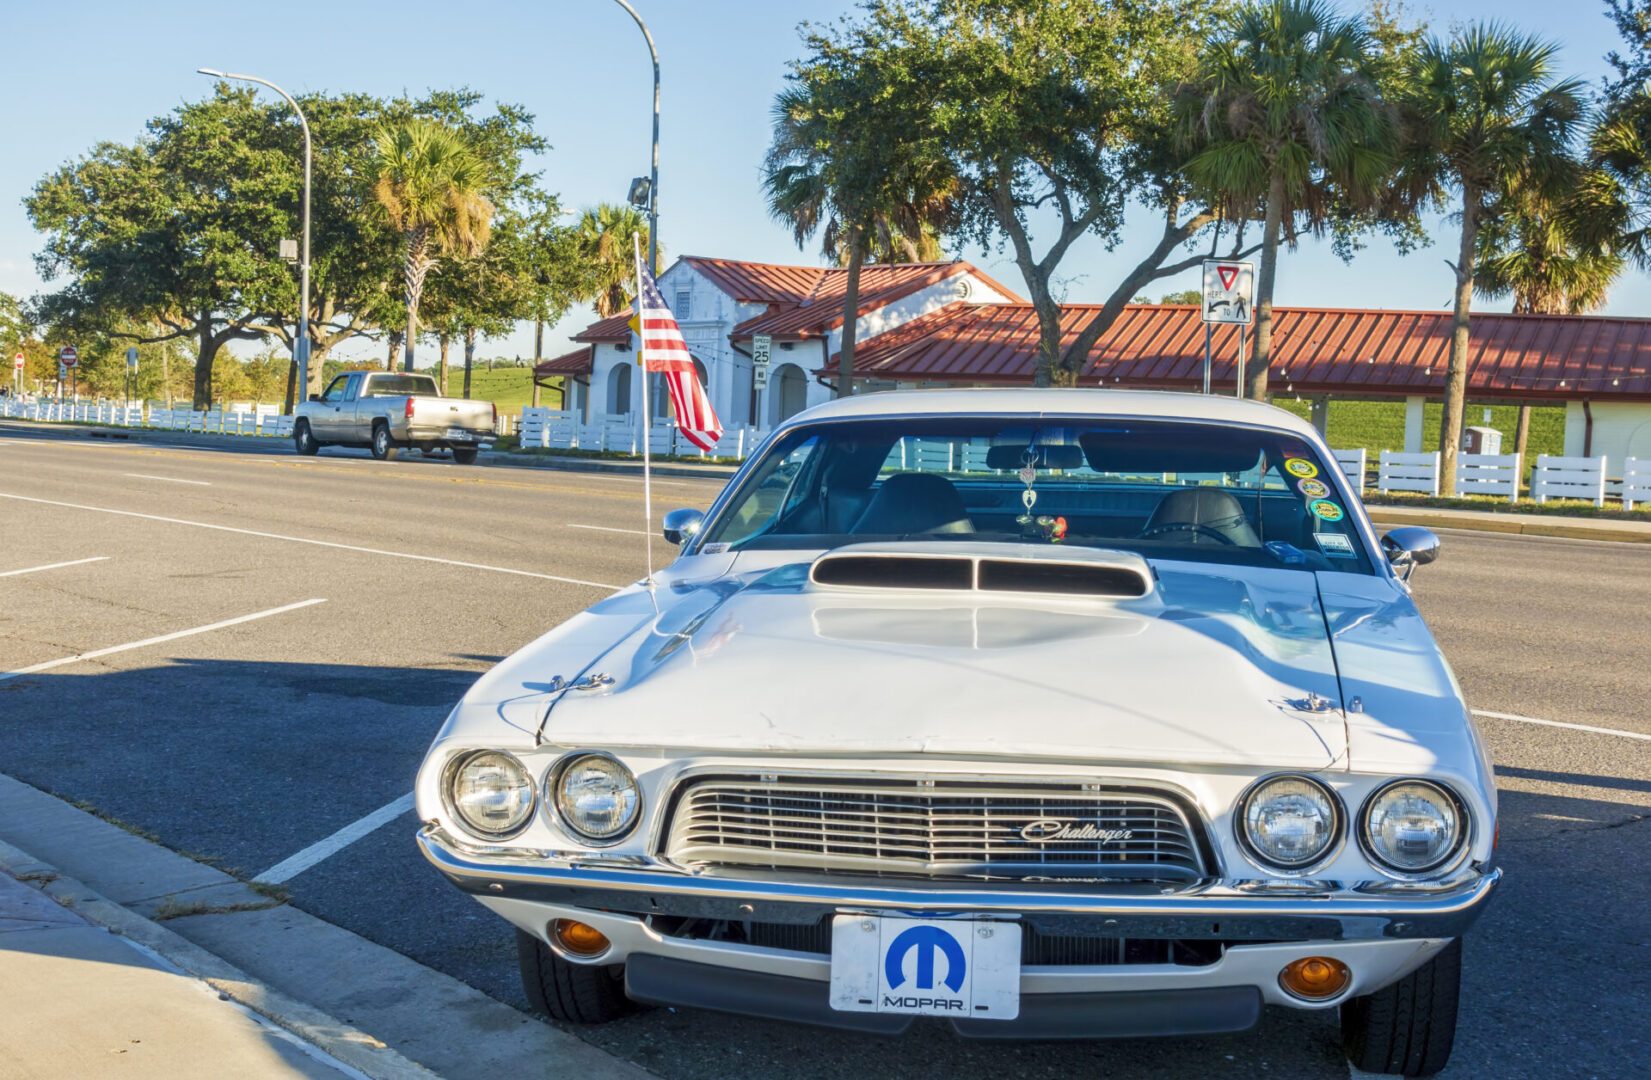 New Orleans, USA - Nov 26, 2017: A white Dodge Challenger car stationed in a public parking space. It sports a small American flag on its antenna. Near Lake Pontchartrain.